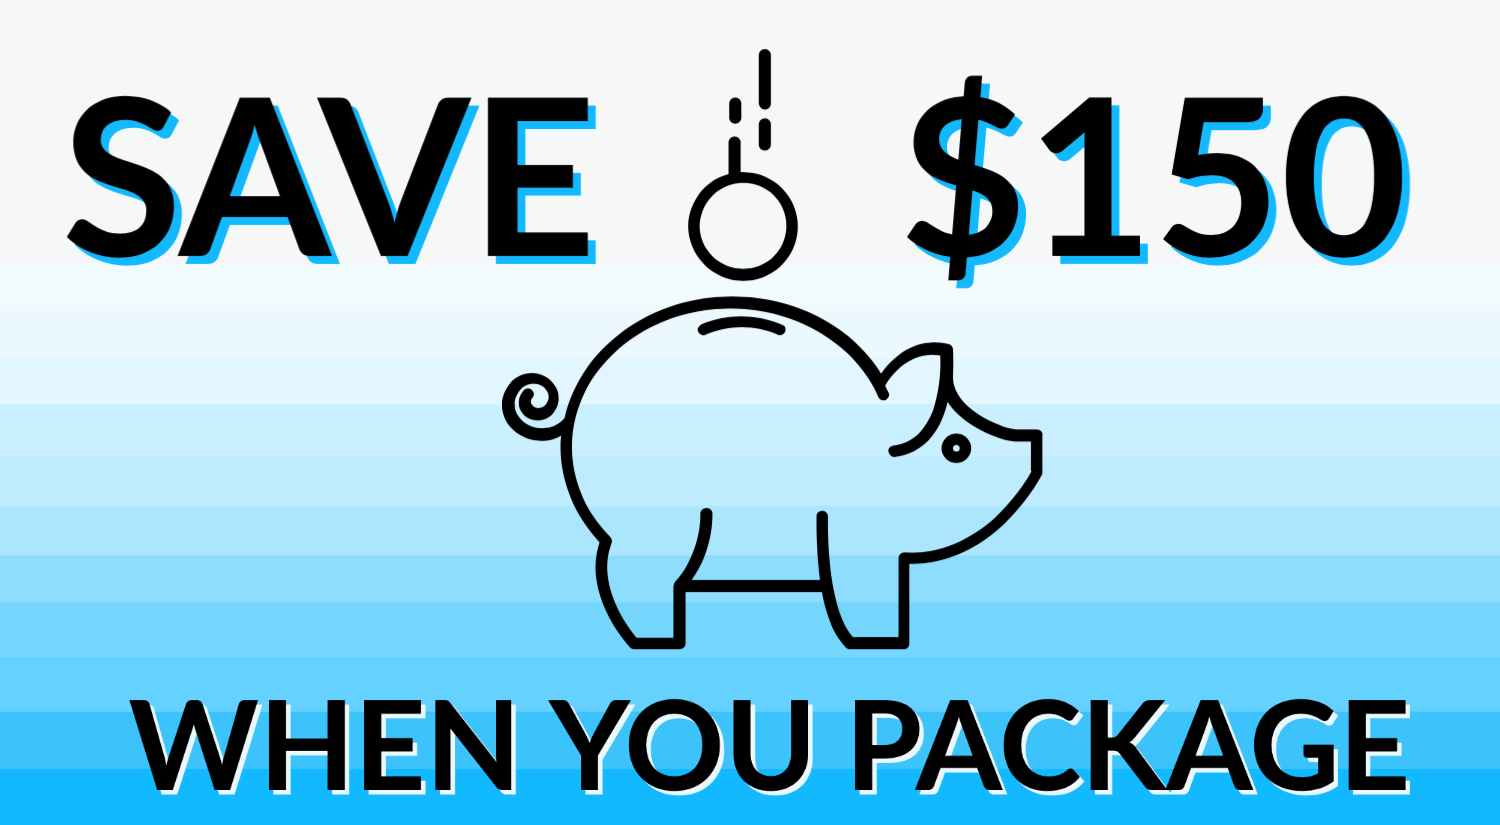 Save when you package